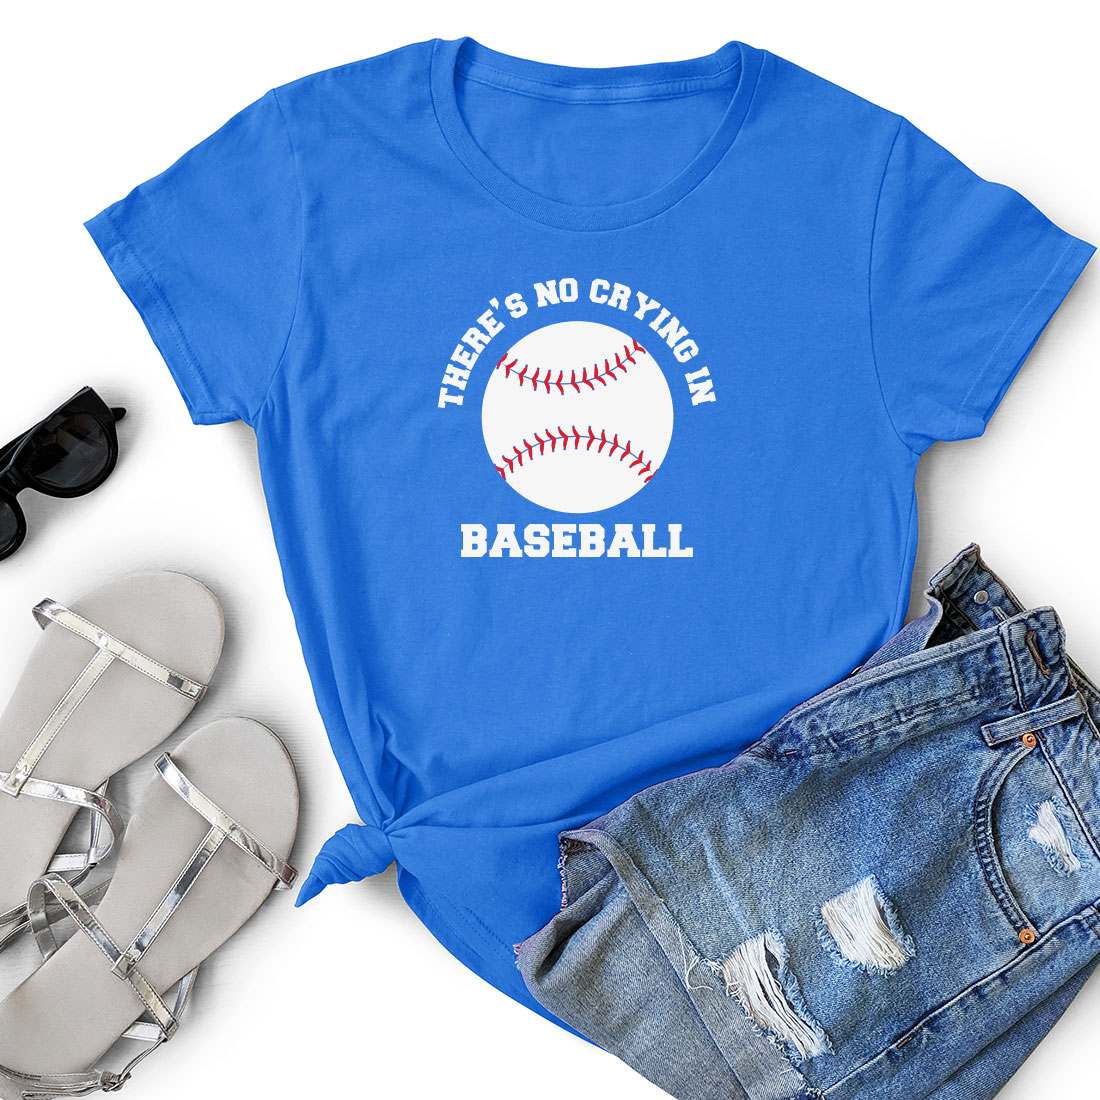 T - shirt that says there's no crying in baseball.